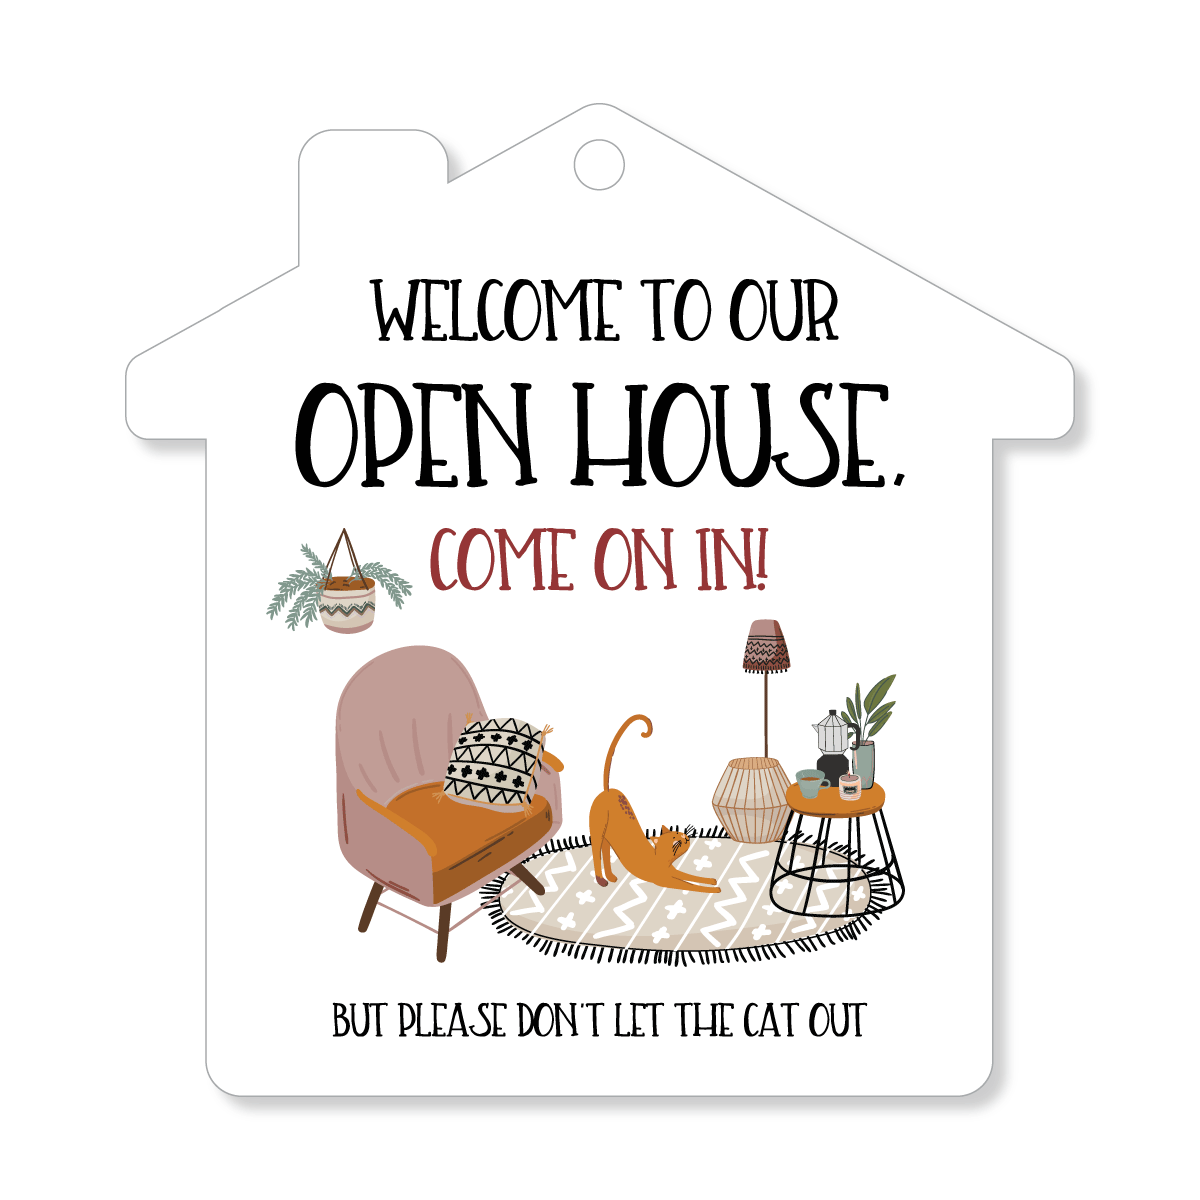 Open House Door Sign - Please Don't Let The Cat Out - All Things Real Estate